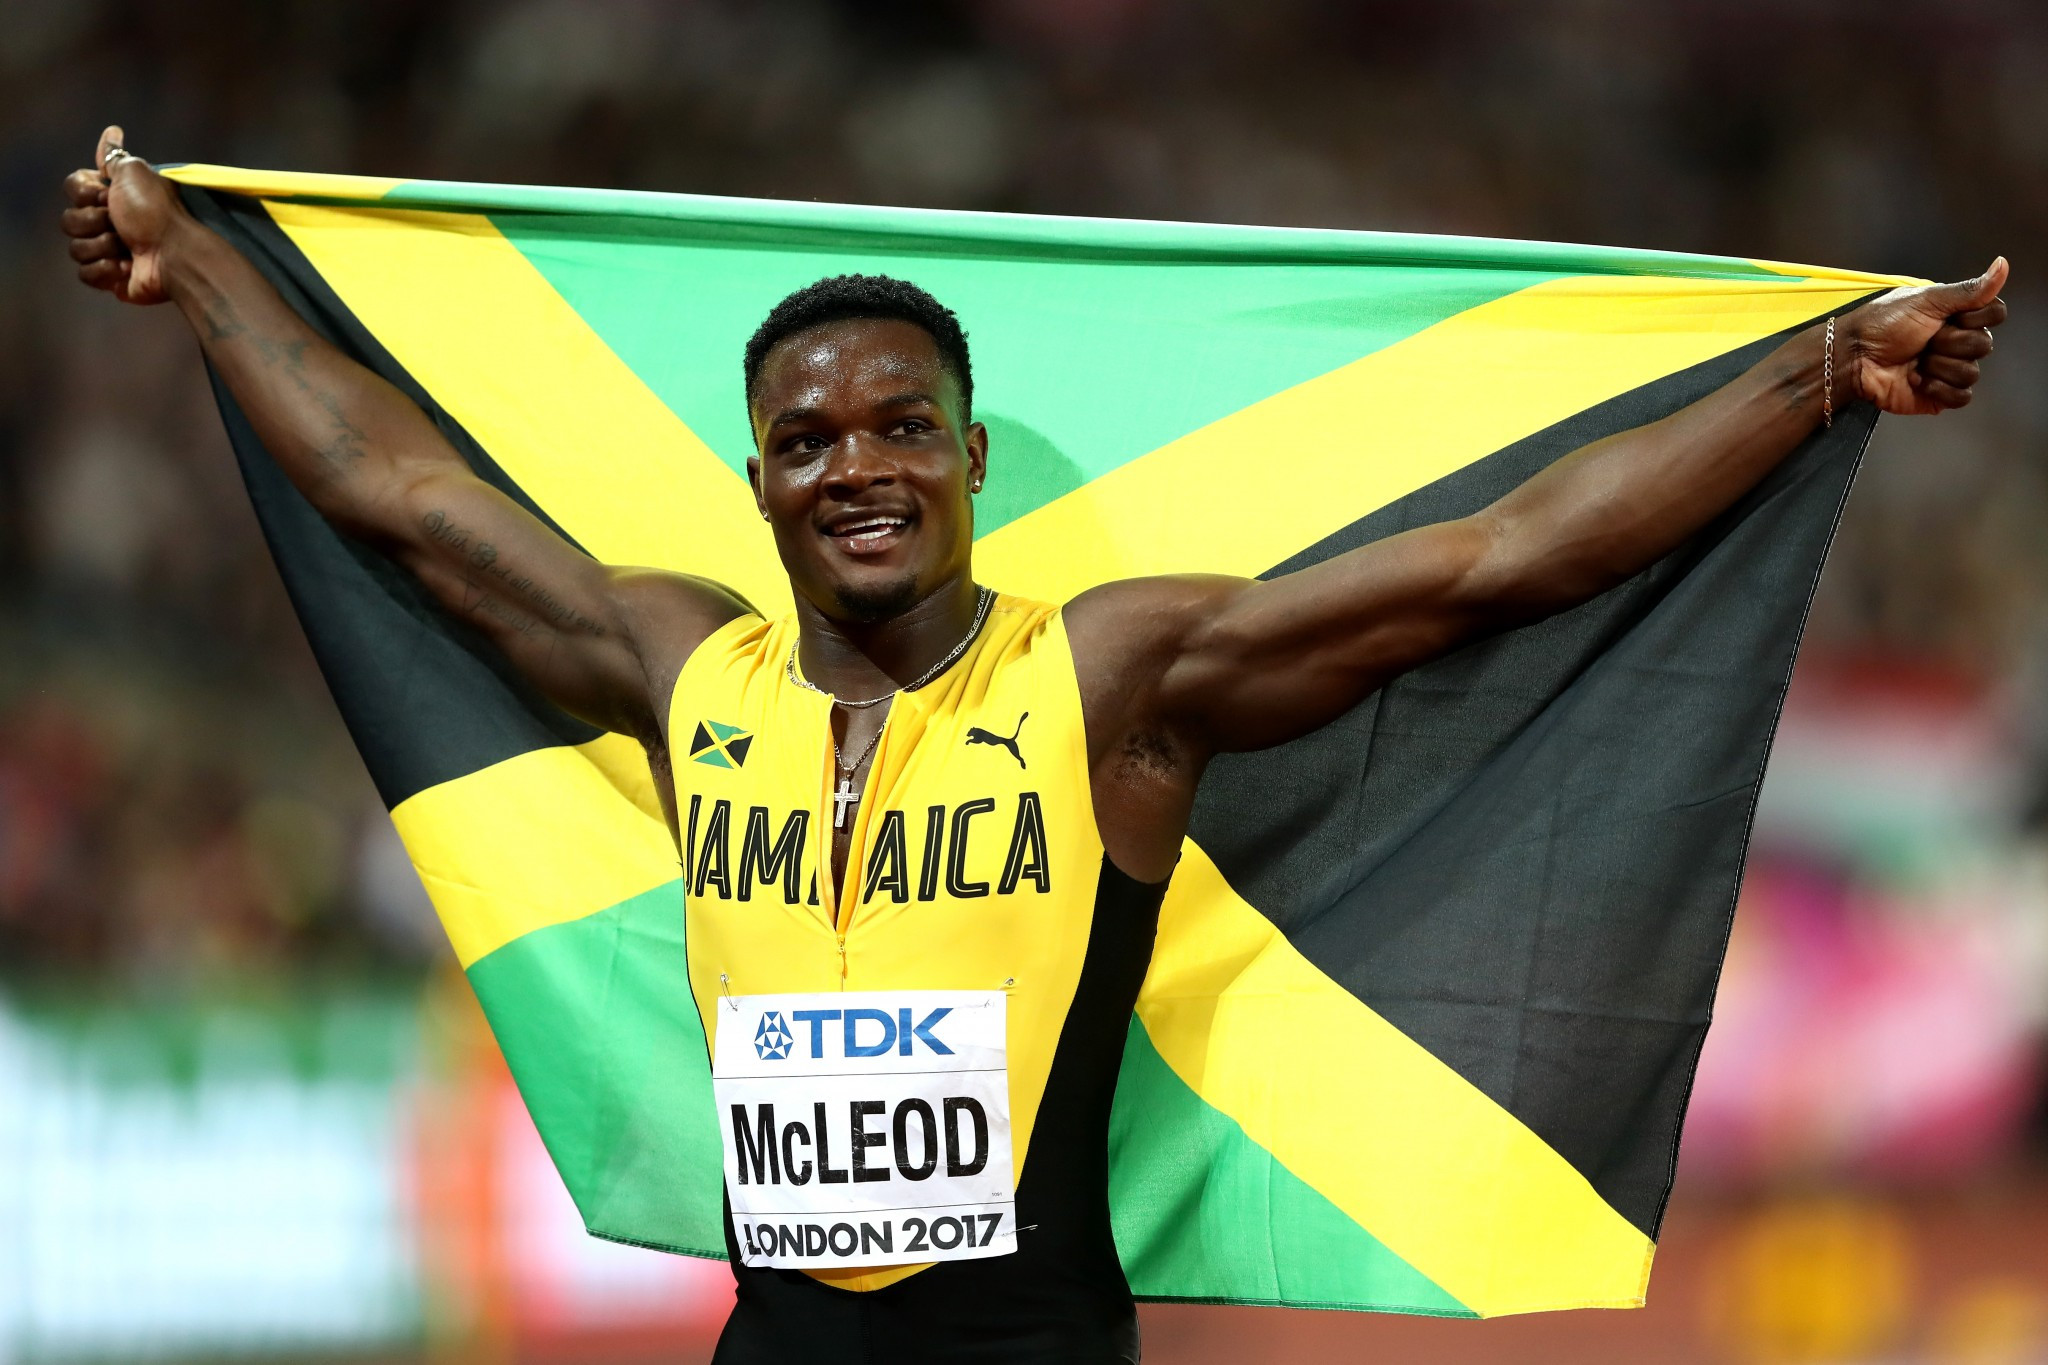 Omar McLeod dedicated his victory to retiring sprint king Usain Bolt ©Getty Images